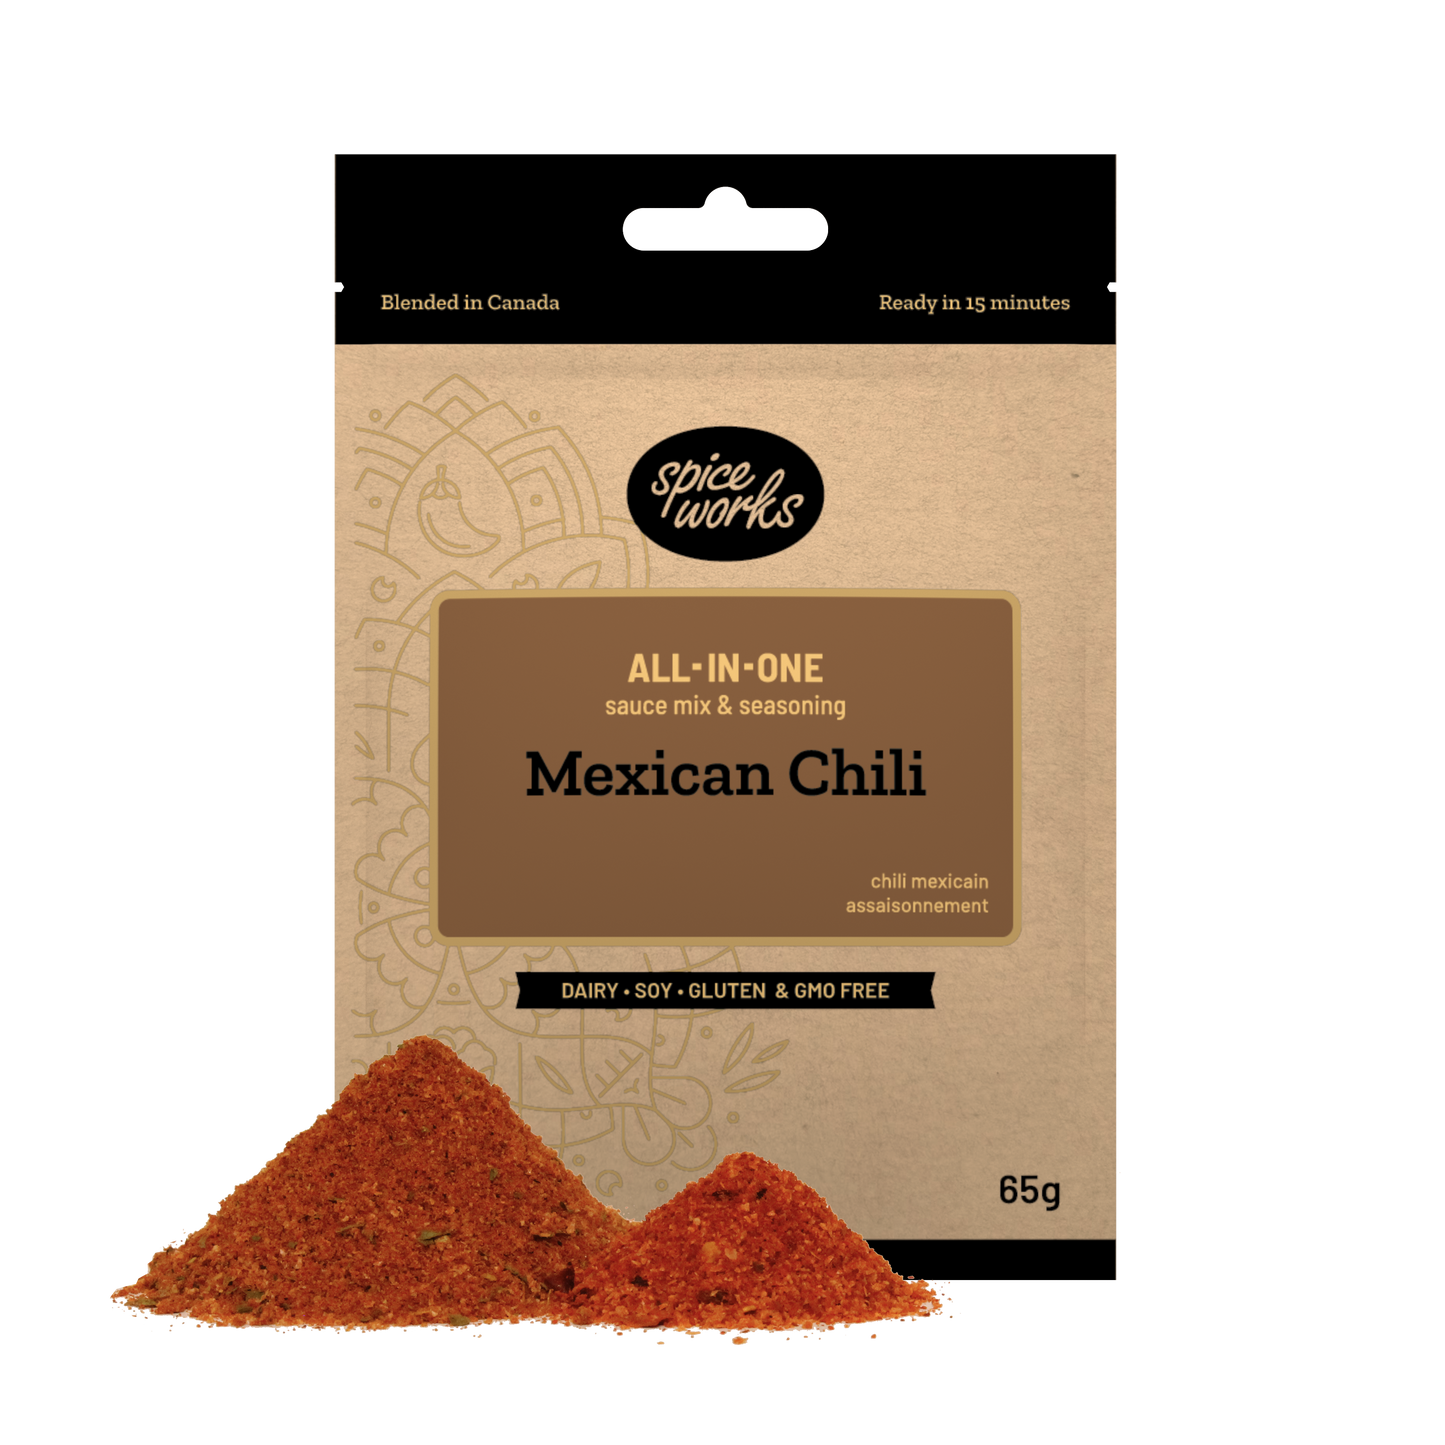 SPICE WORKS Mexican Chili All-In-One